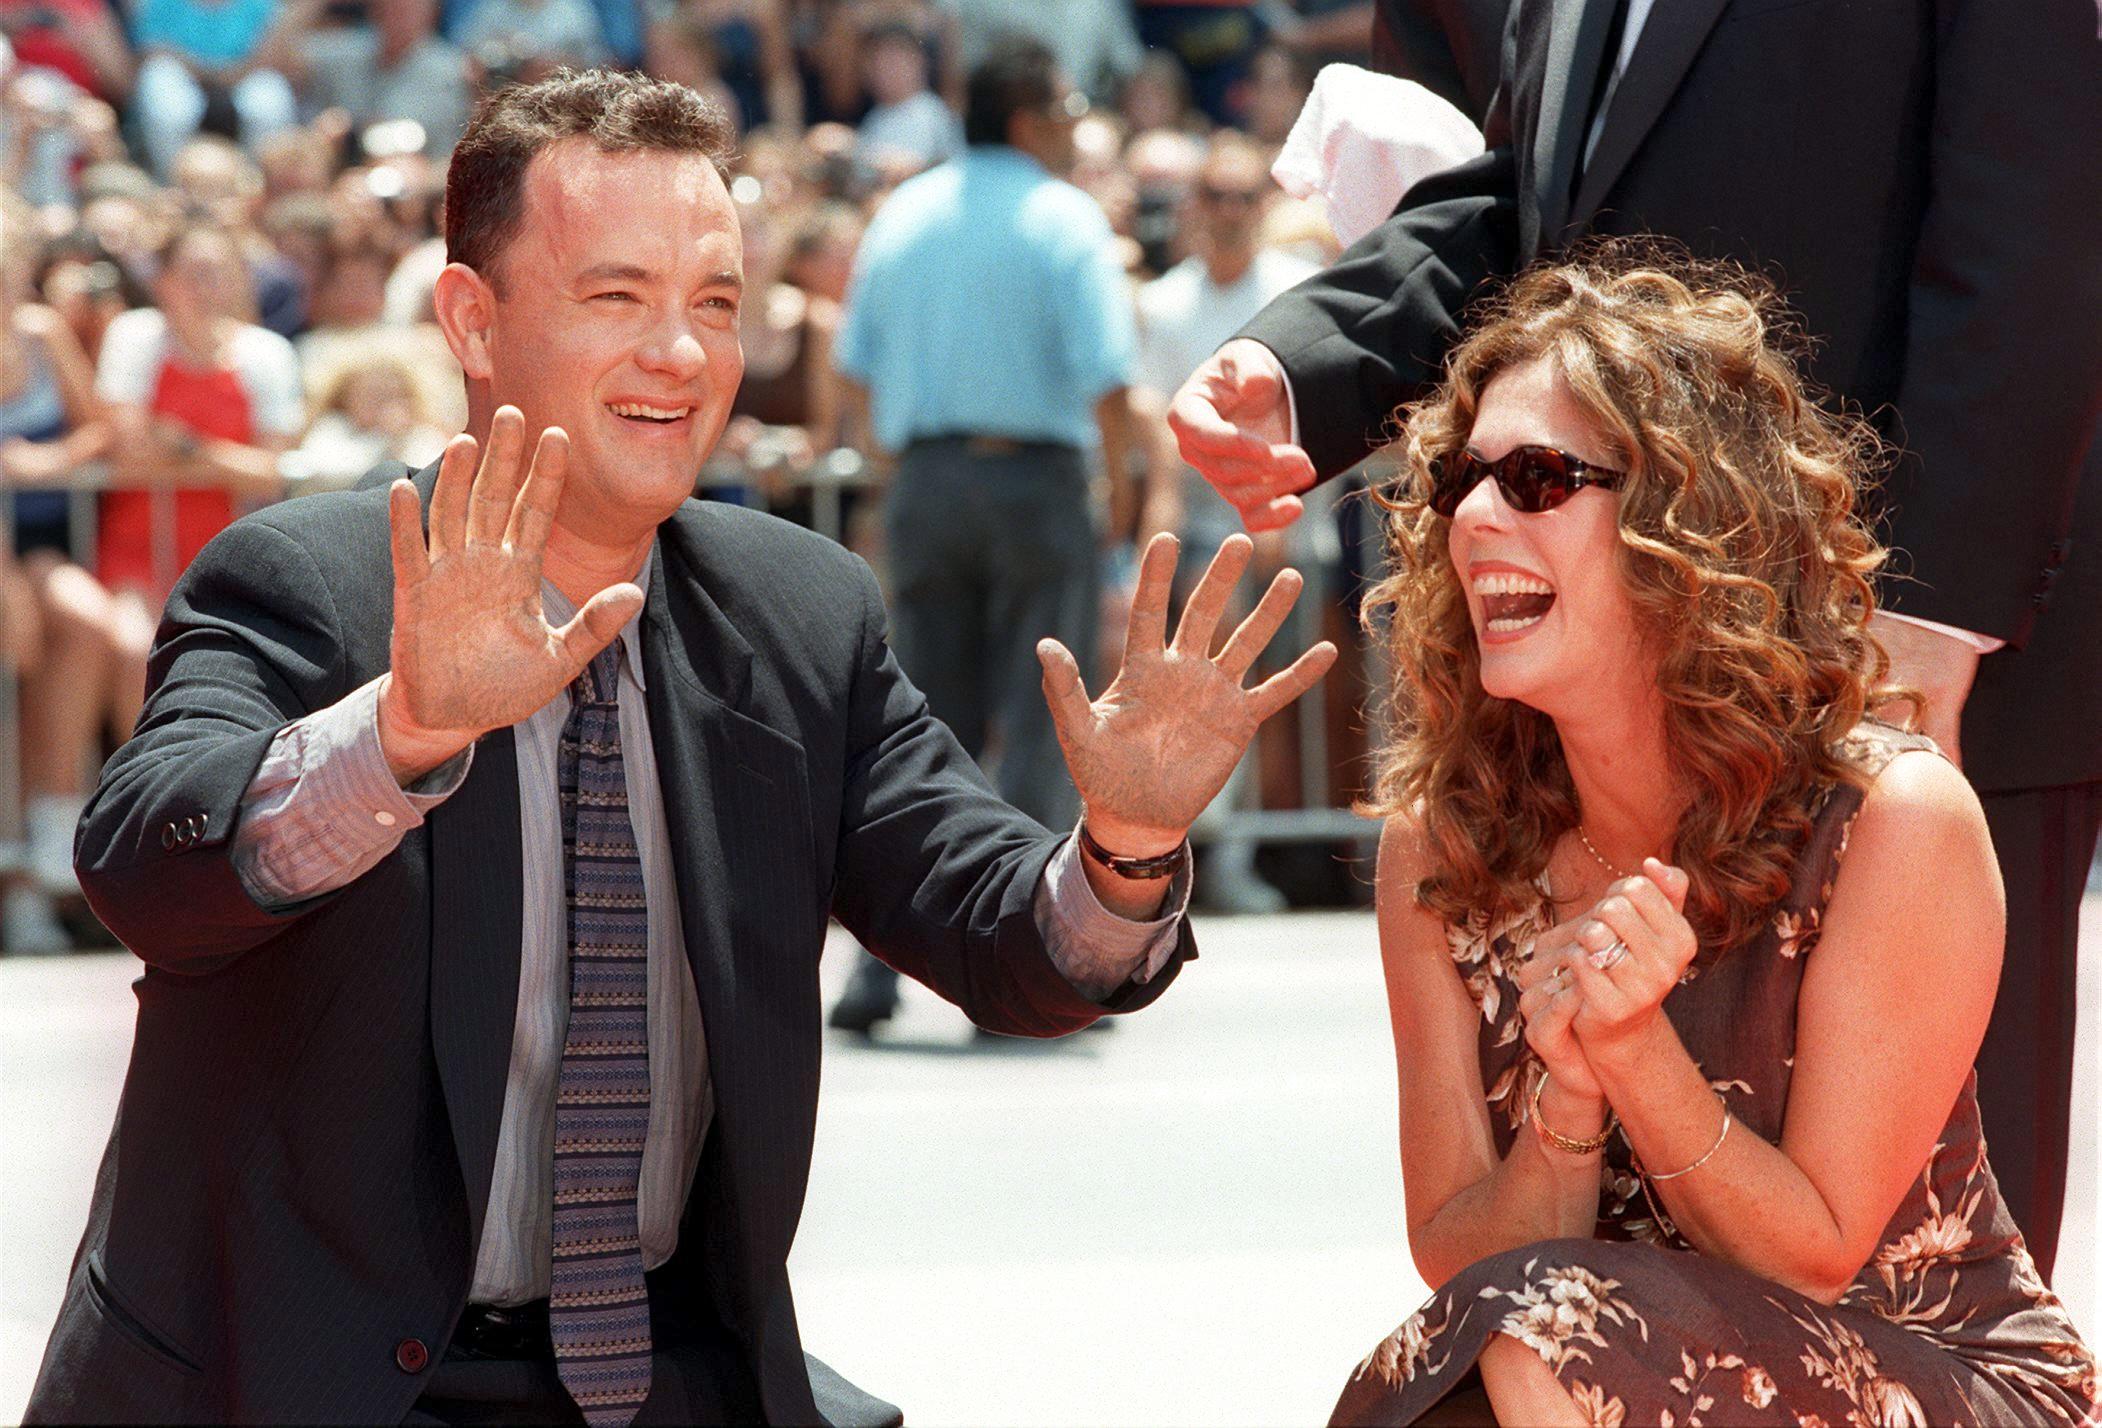 Tom Hanks and Rita Wilson at his hand print ceremony in Hollywood, California on July 23, 1998 | Source: Getty Images